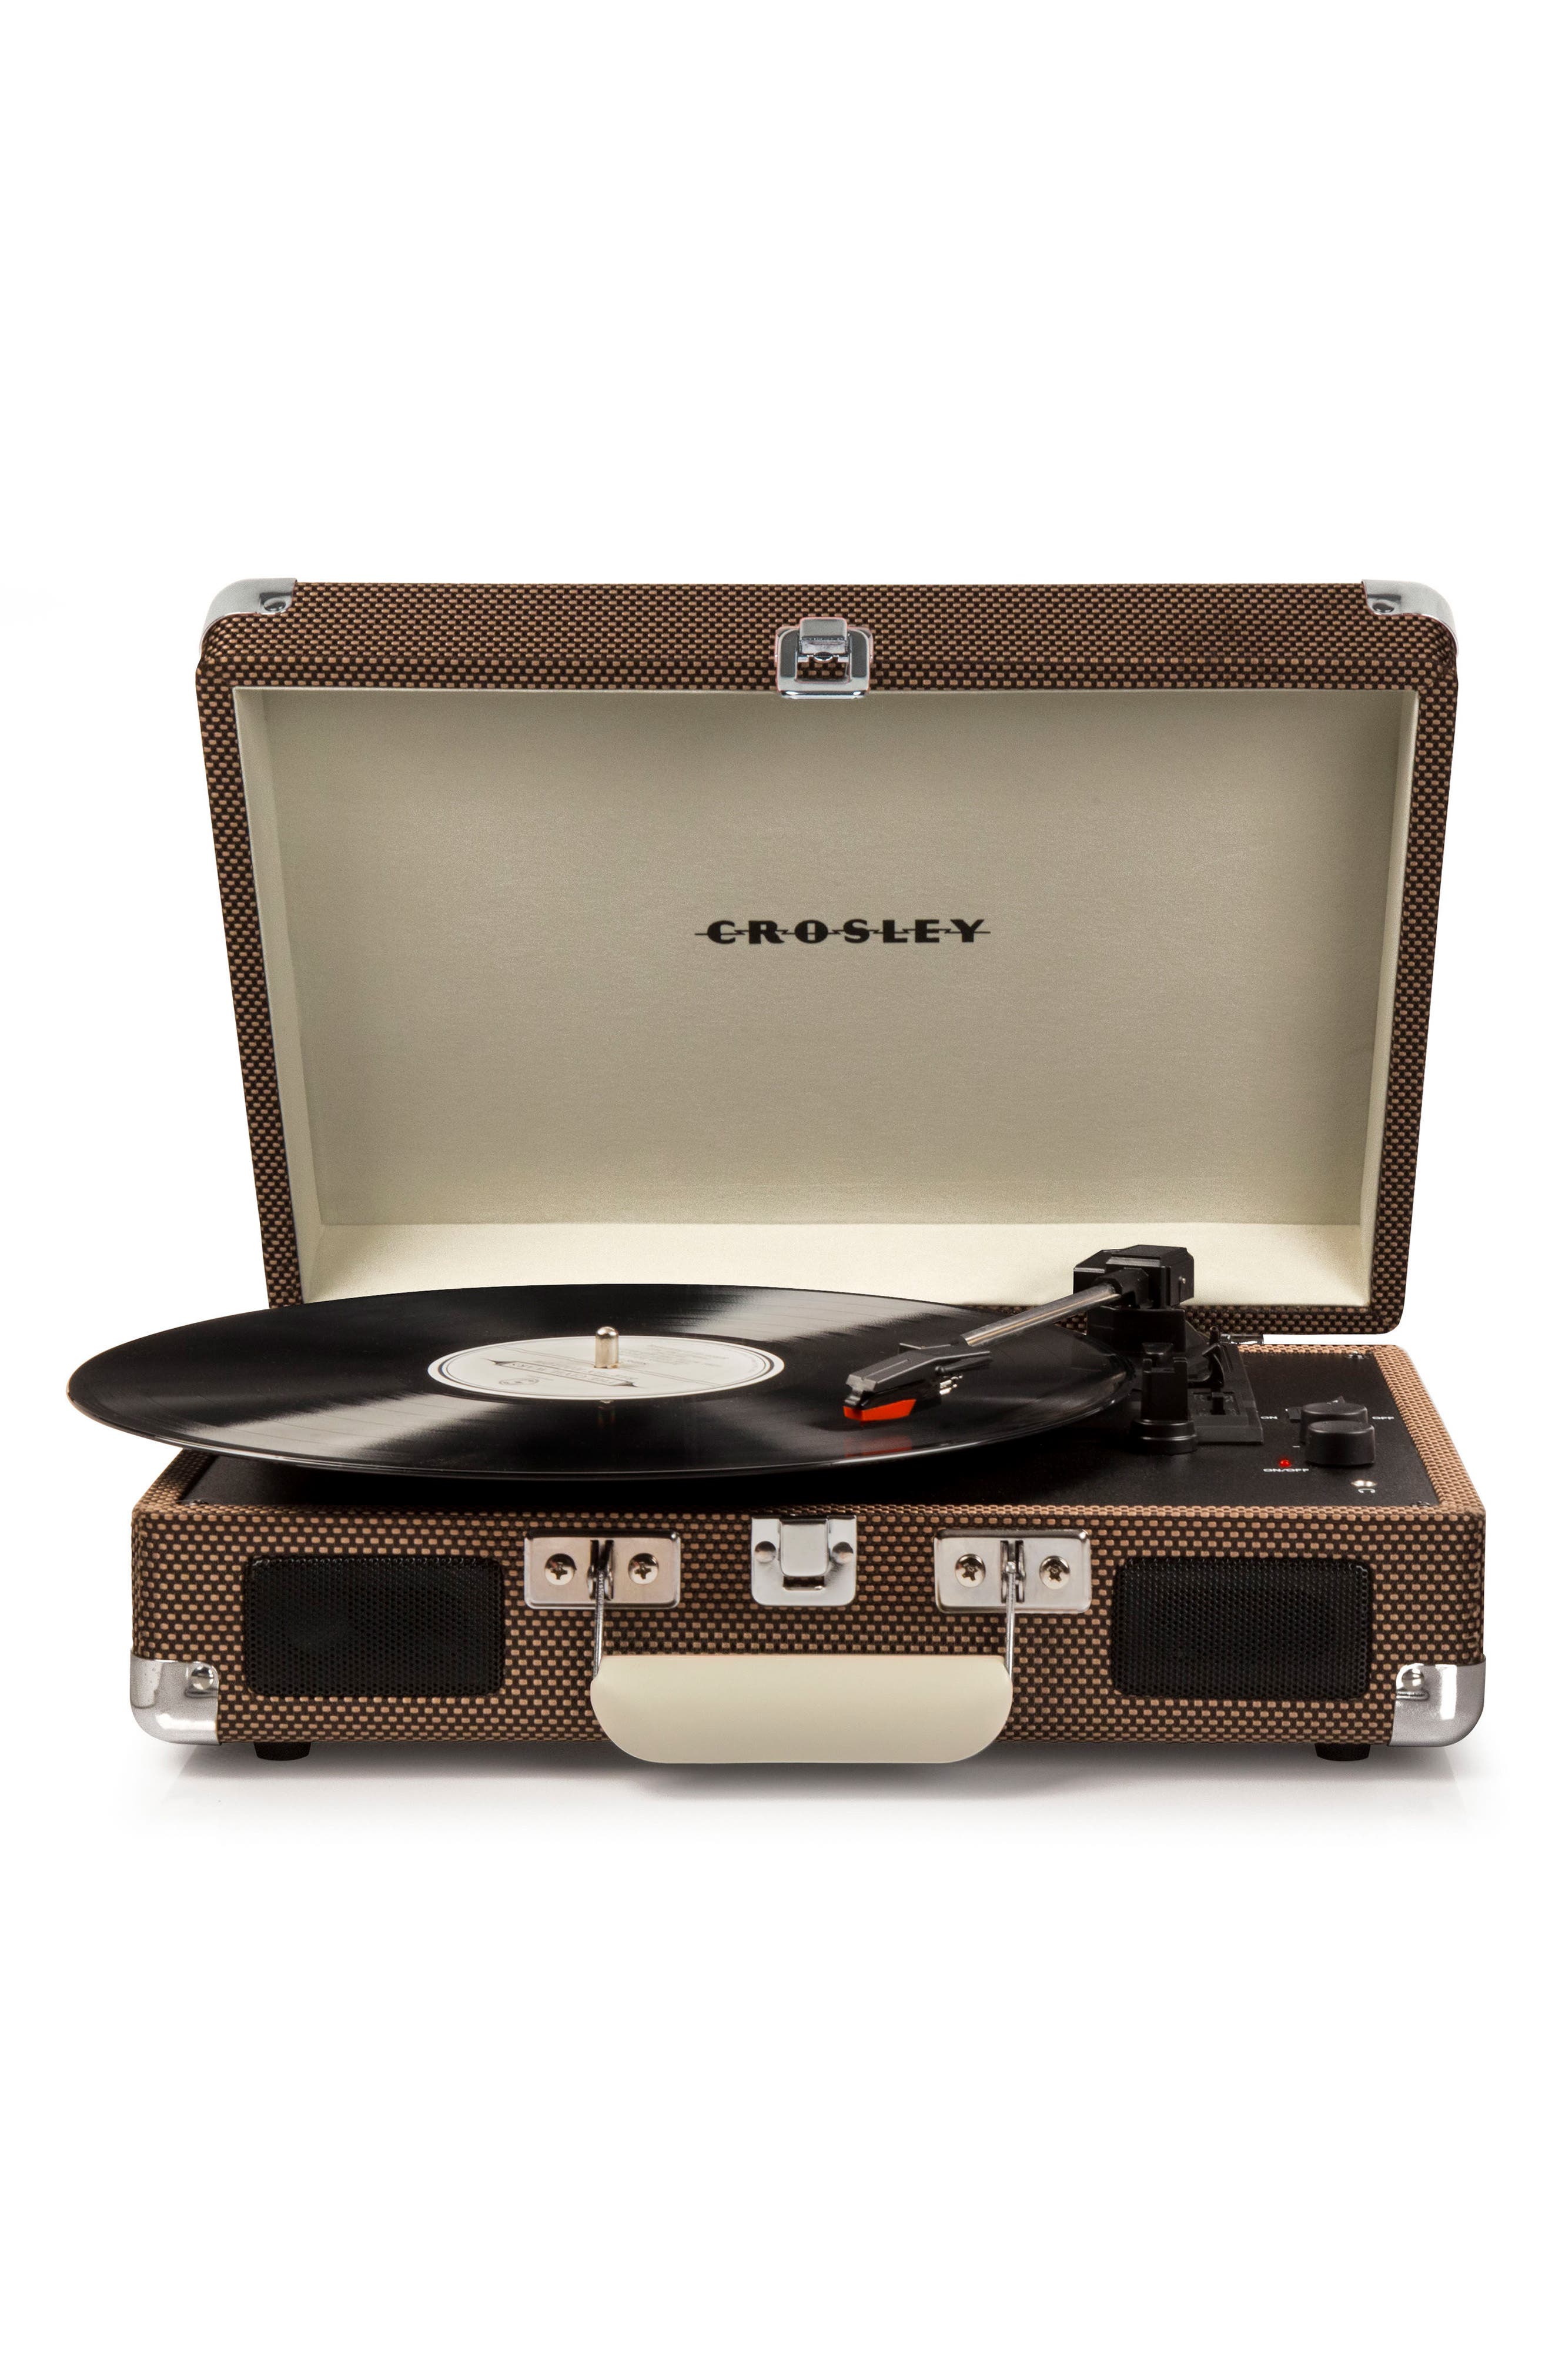 UPC 710244209397 product image for Crosley Radio Cruiser Deluxe Turntable, Size One Size - Brown | upcitemdb.com